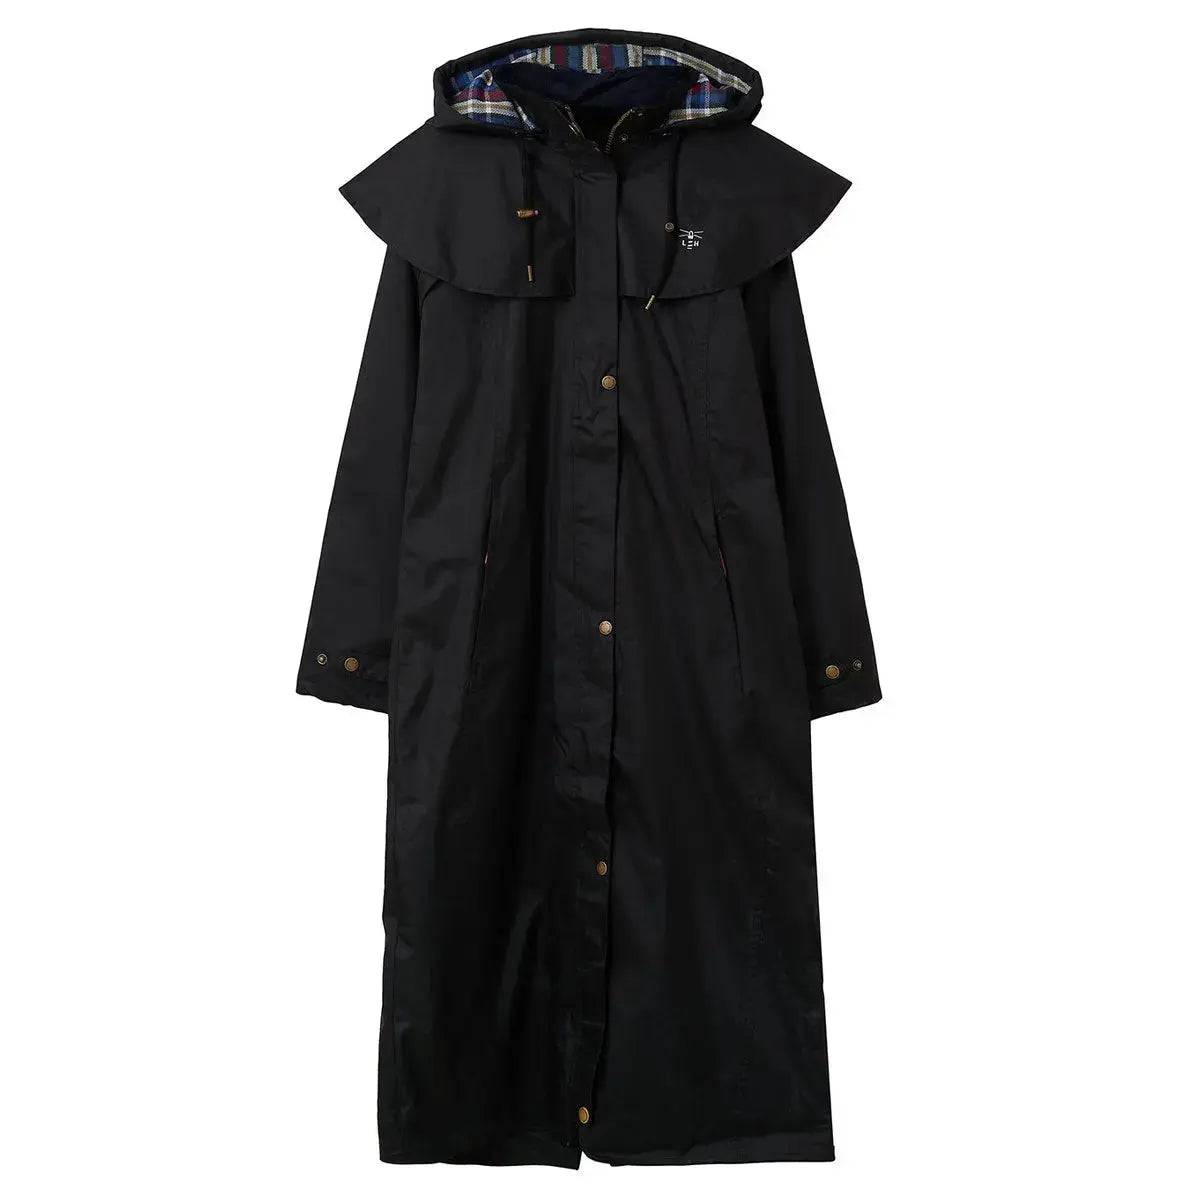 Lighthouse Outback Full Length Waterproof Raincoat Black 10 Lighthouse Outdoor Coats & Jackets Barnstaple Equestrian Supplies